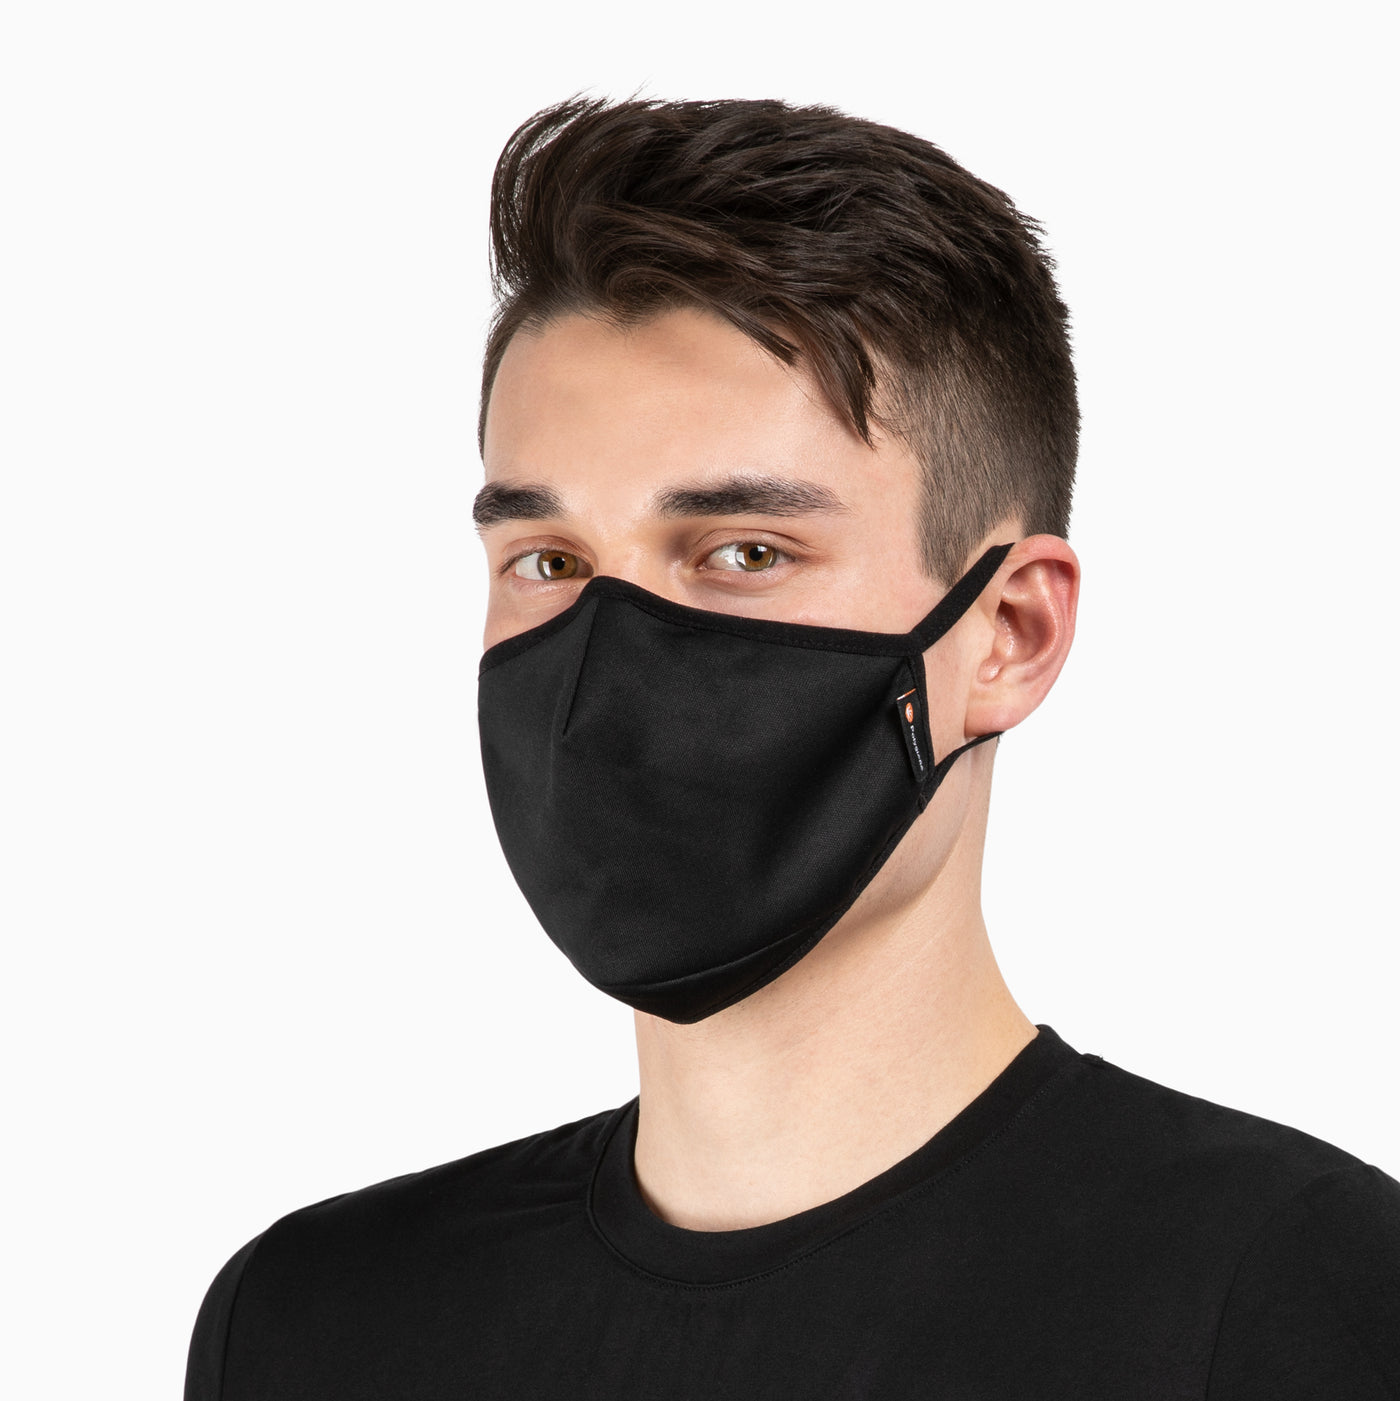 NonZero Gravity Sustainable, Antibacterial SeaTex Eco Performance Mask Black - Made with Polygiene® treated SeaWool